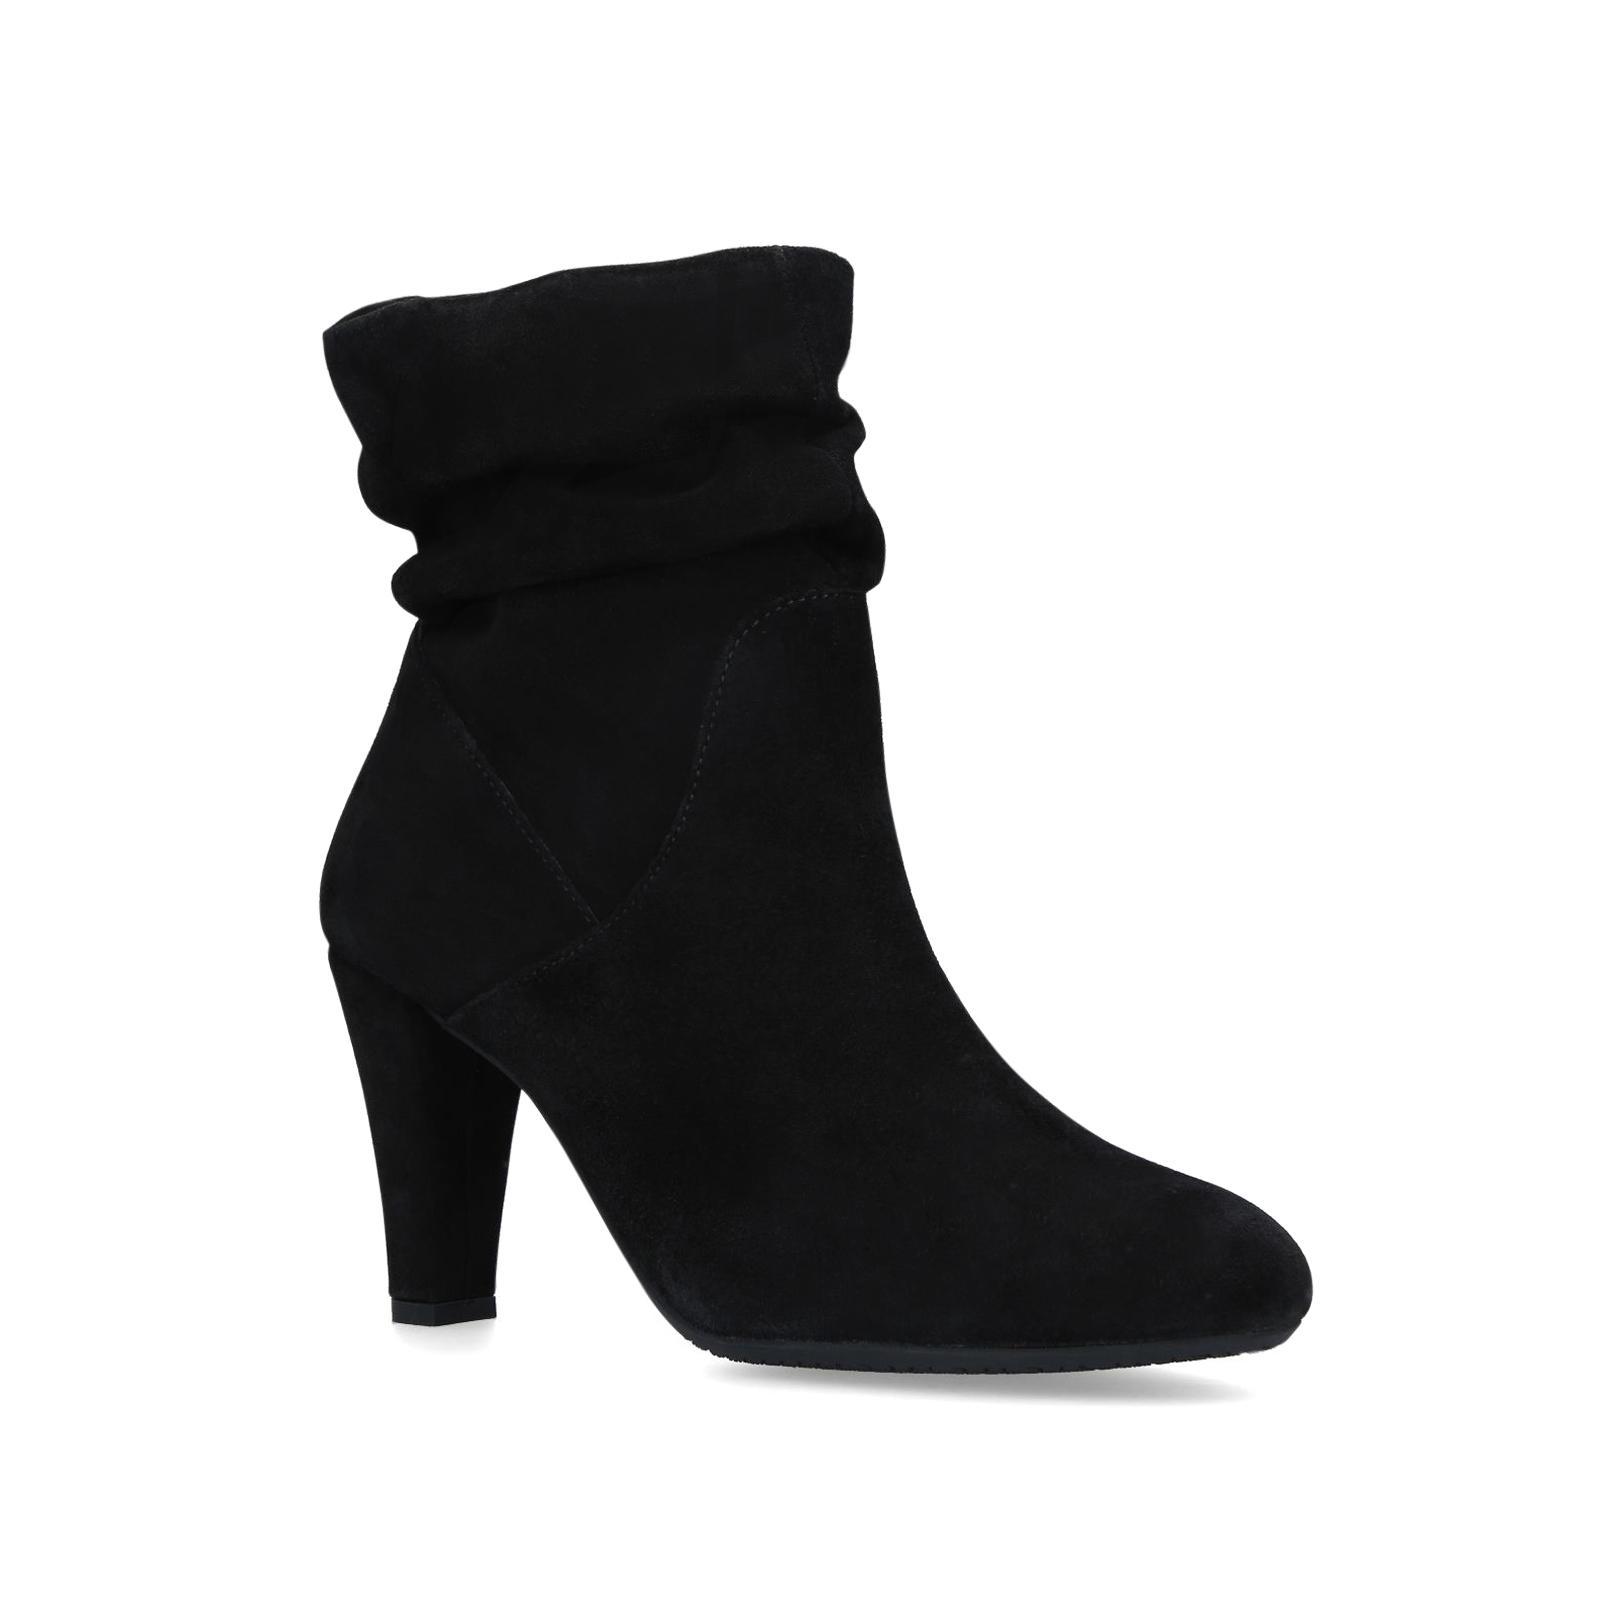 RITA Black Suede Ankle Boots by CARVELA COMFORT